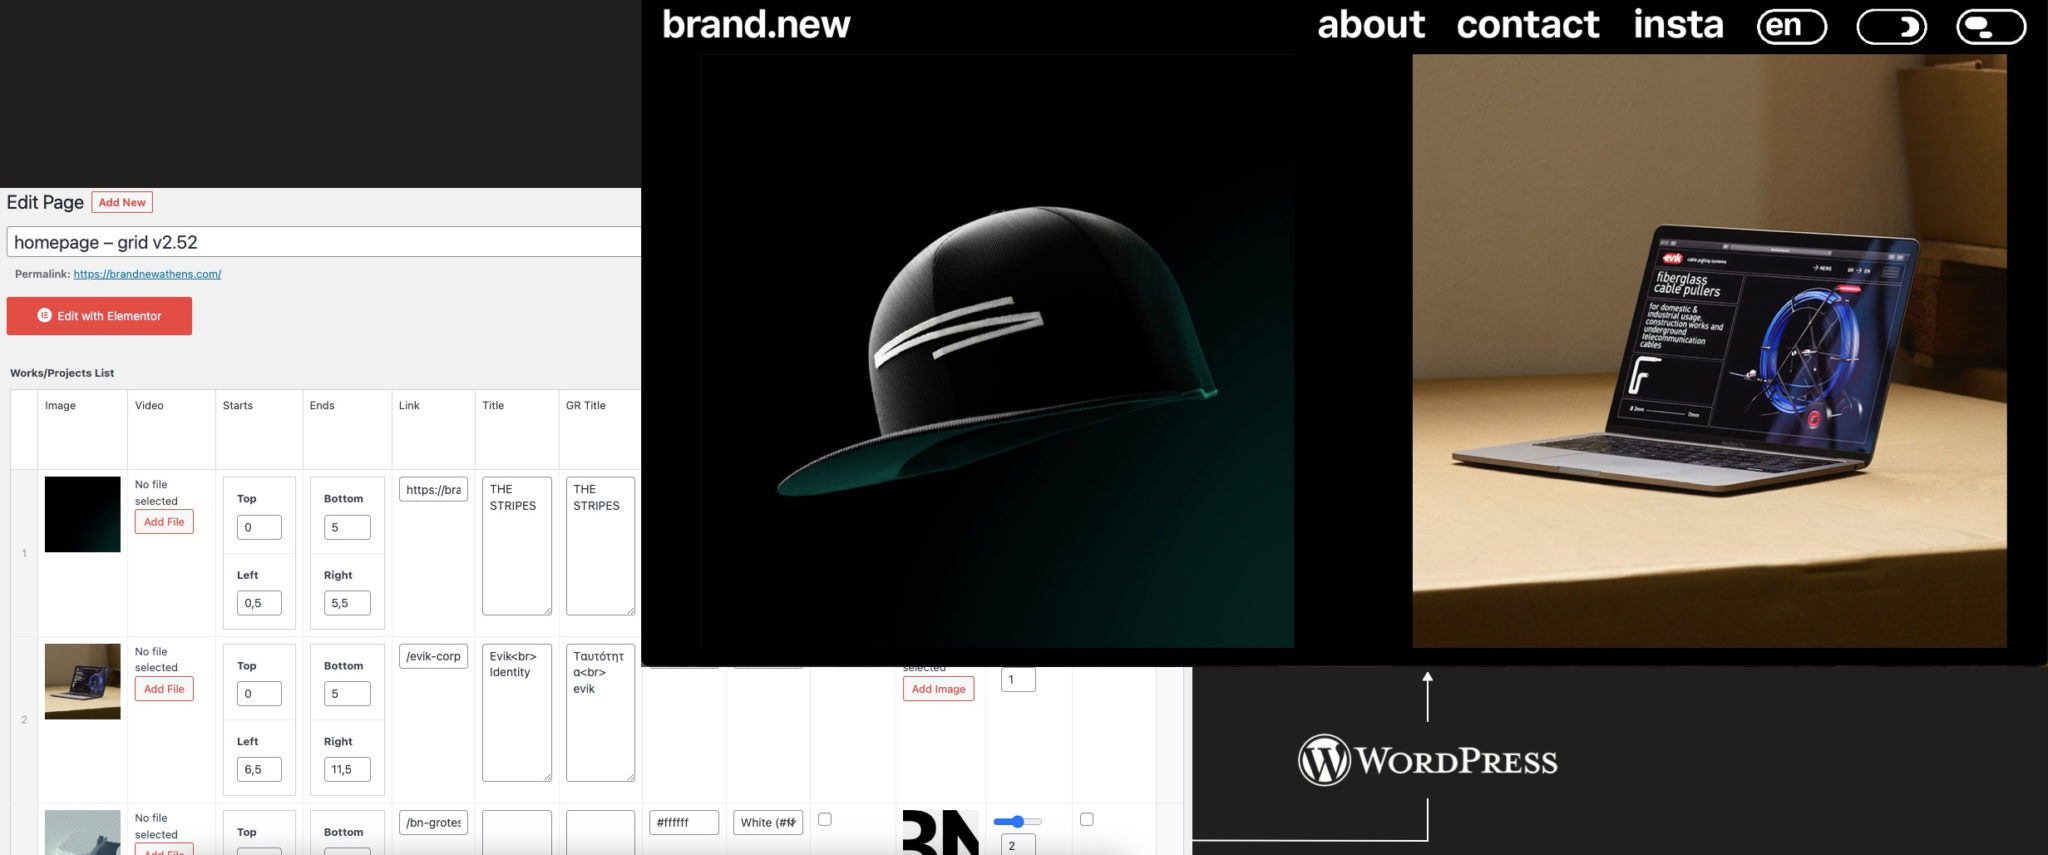 The backend of brand.new